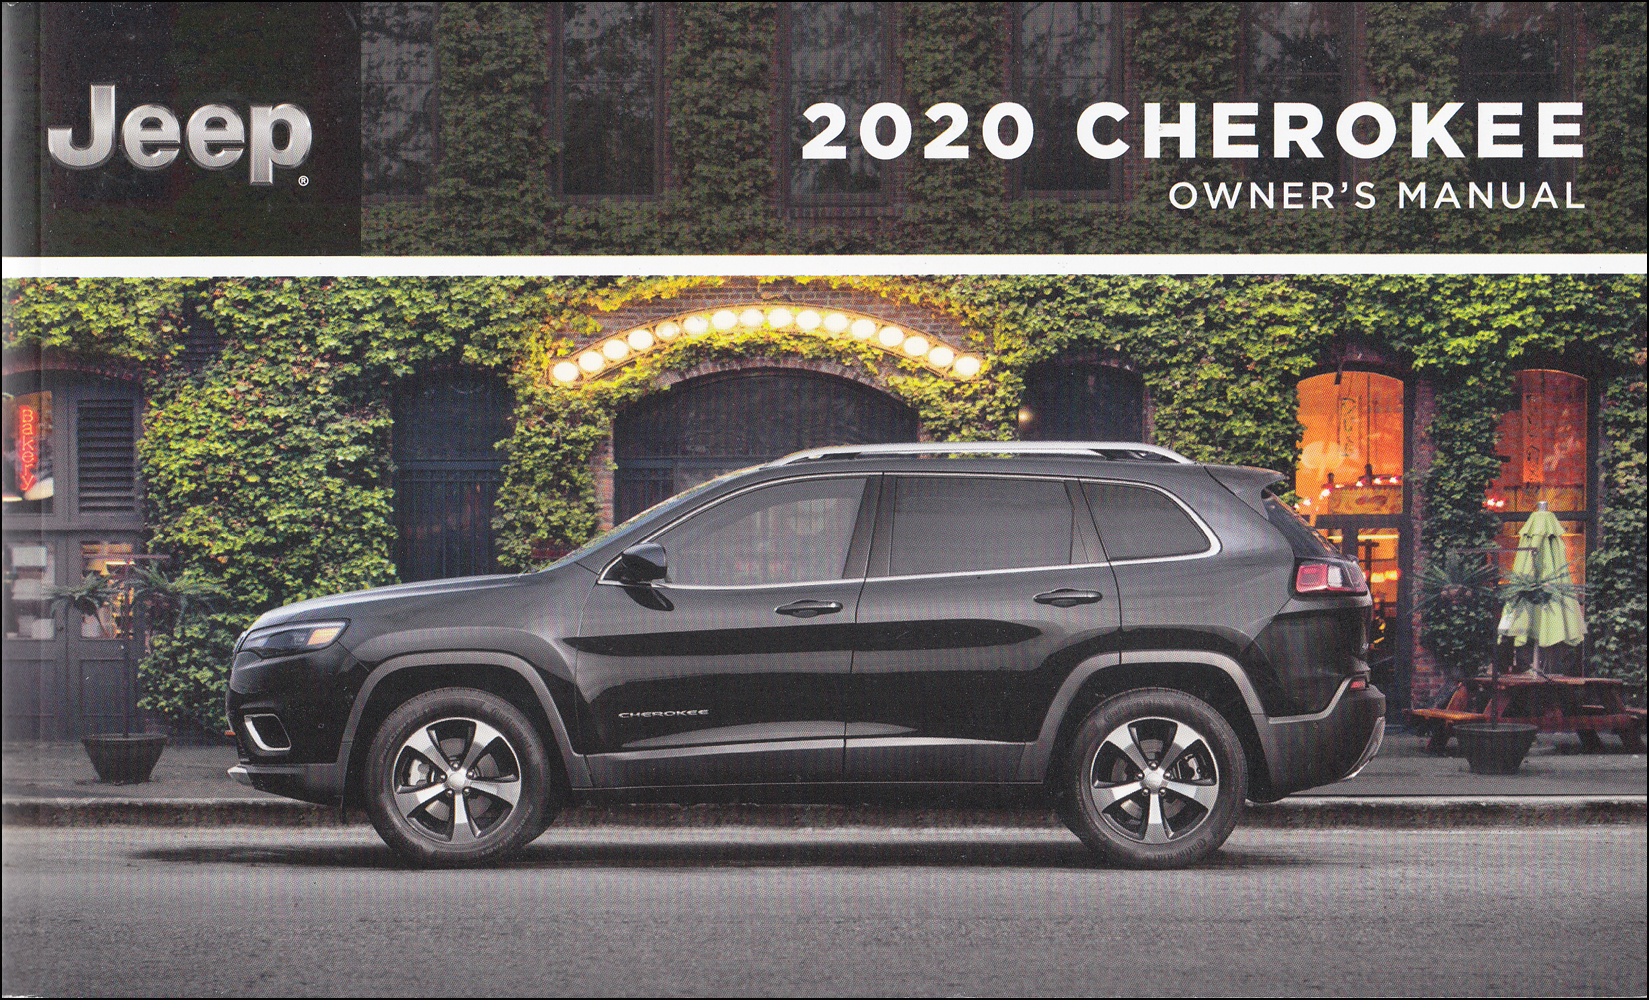 2020 Jeep Cherokee Owner's Manual Original - Extended 479-page version